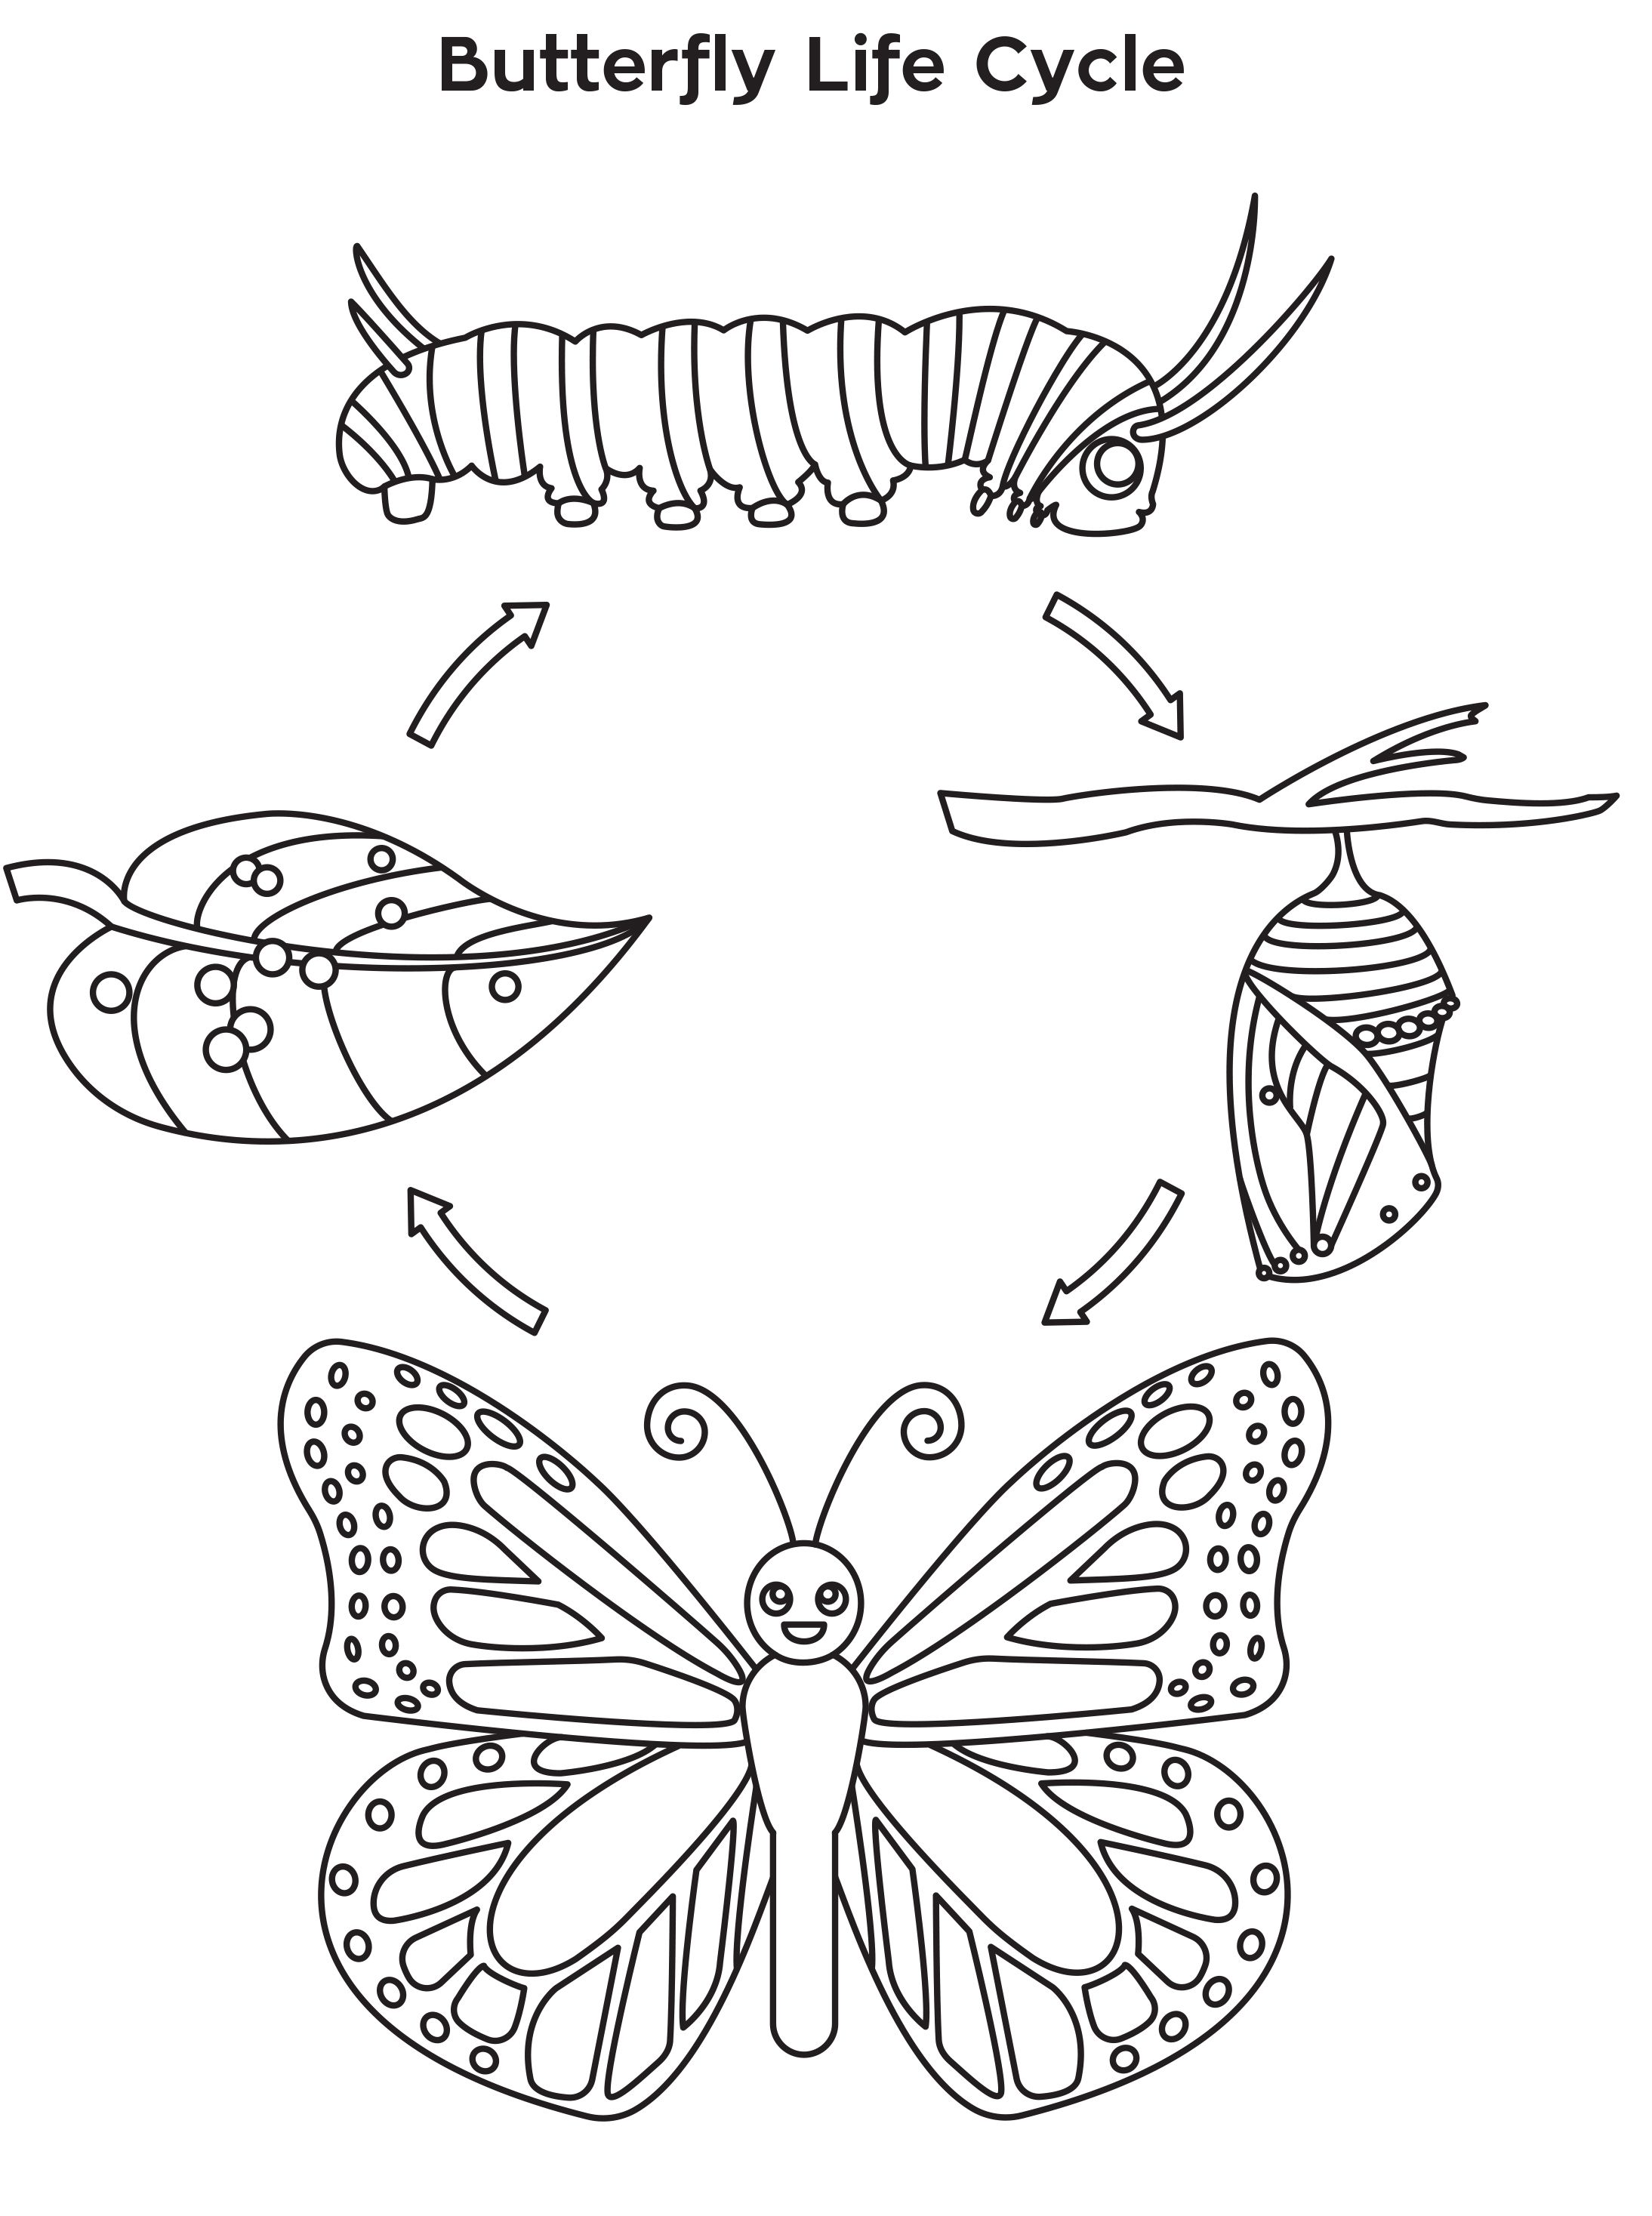 Meeting 6: Butterfly Life Cycle Coloring Sheet | Life cycles